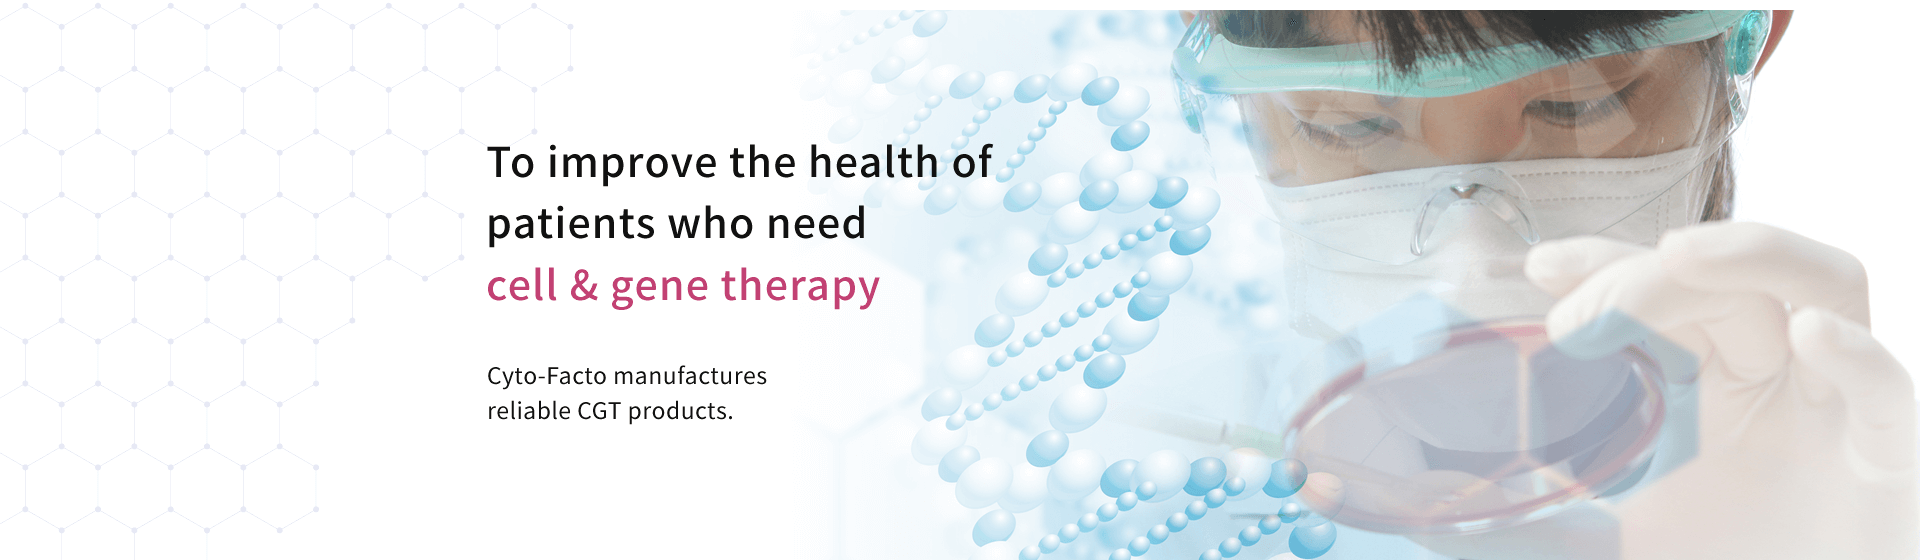 To improve the health of patients who need cell & gene therapy　Cyto-Facto manufactures reliable CGT products.